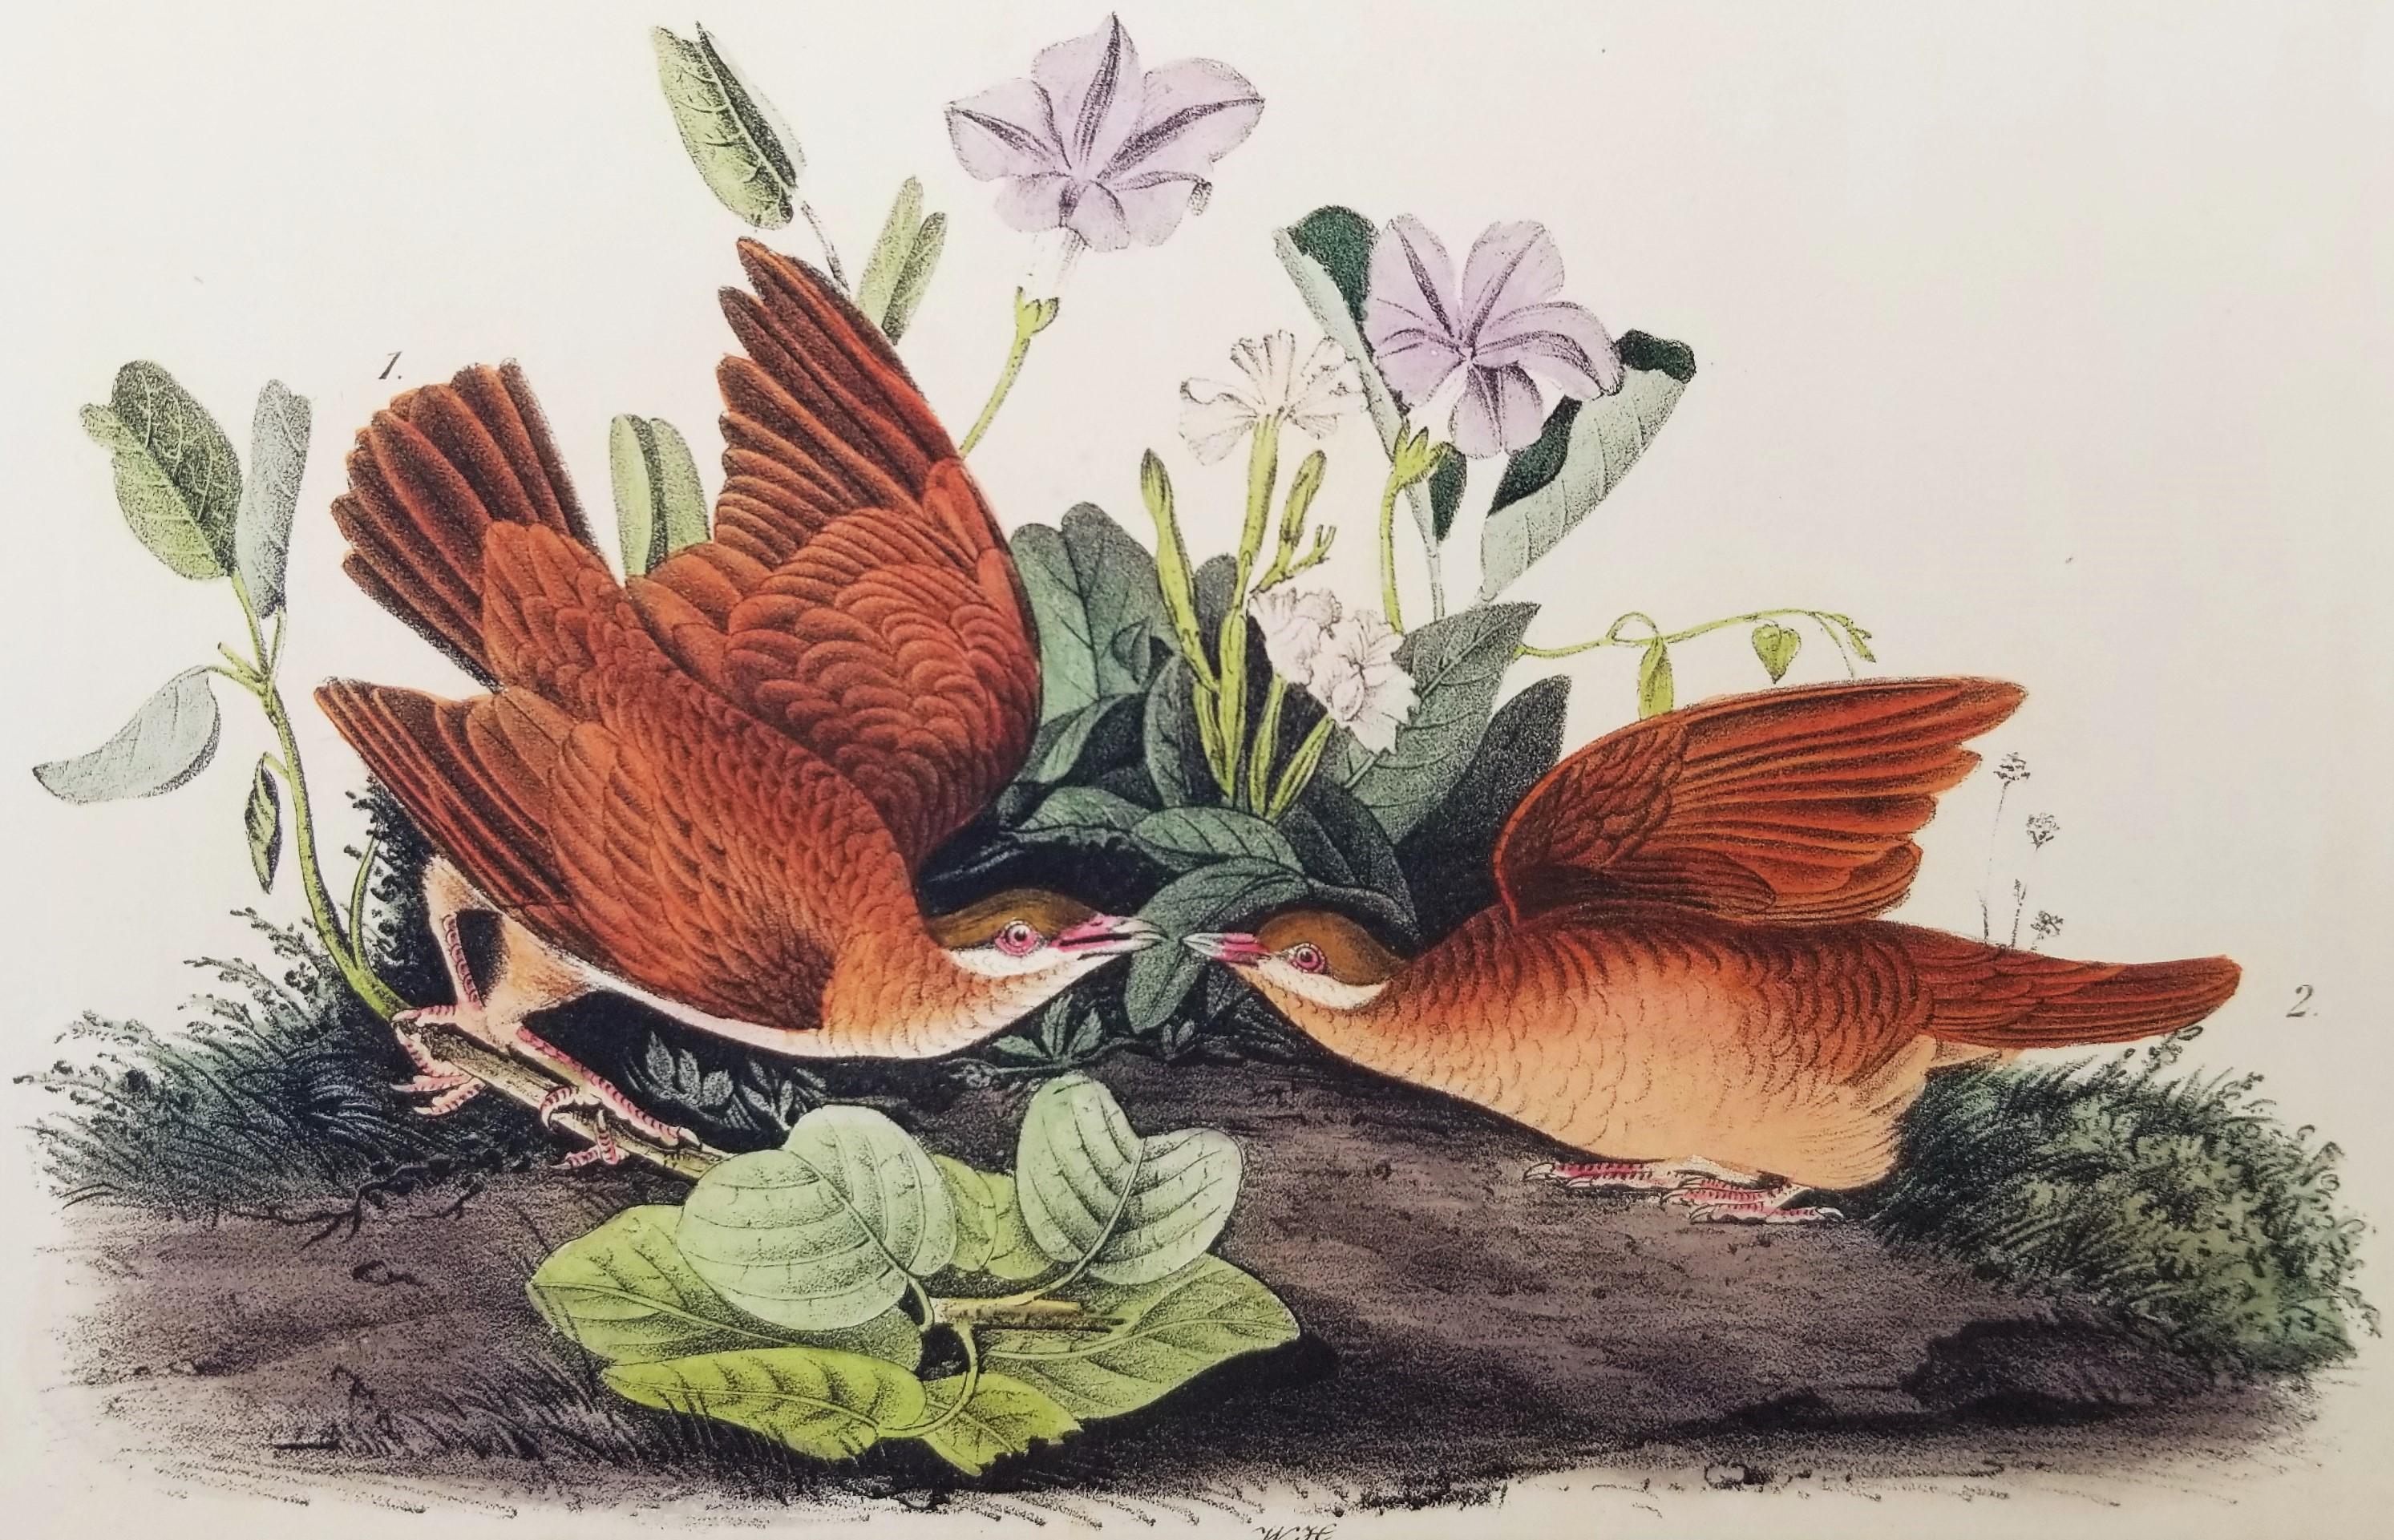 Artist: John James Audubon (American, 1785-1851)
Title: "Key-West Dove" (Plate 282, No. 57)
Portfolio: The Birds of America, First Royal Octavo Edition
Year: 1840-1844
Medium: Original Hand-Colored Lithograph on wove paper
Limited edition: approx.